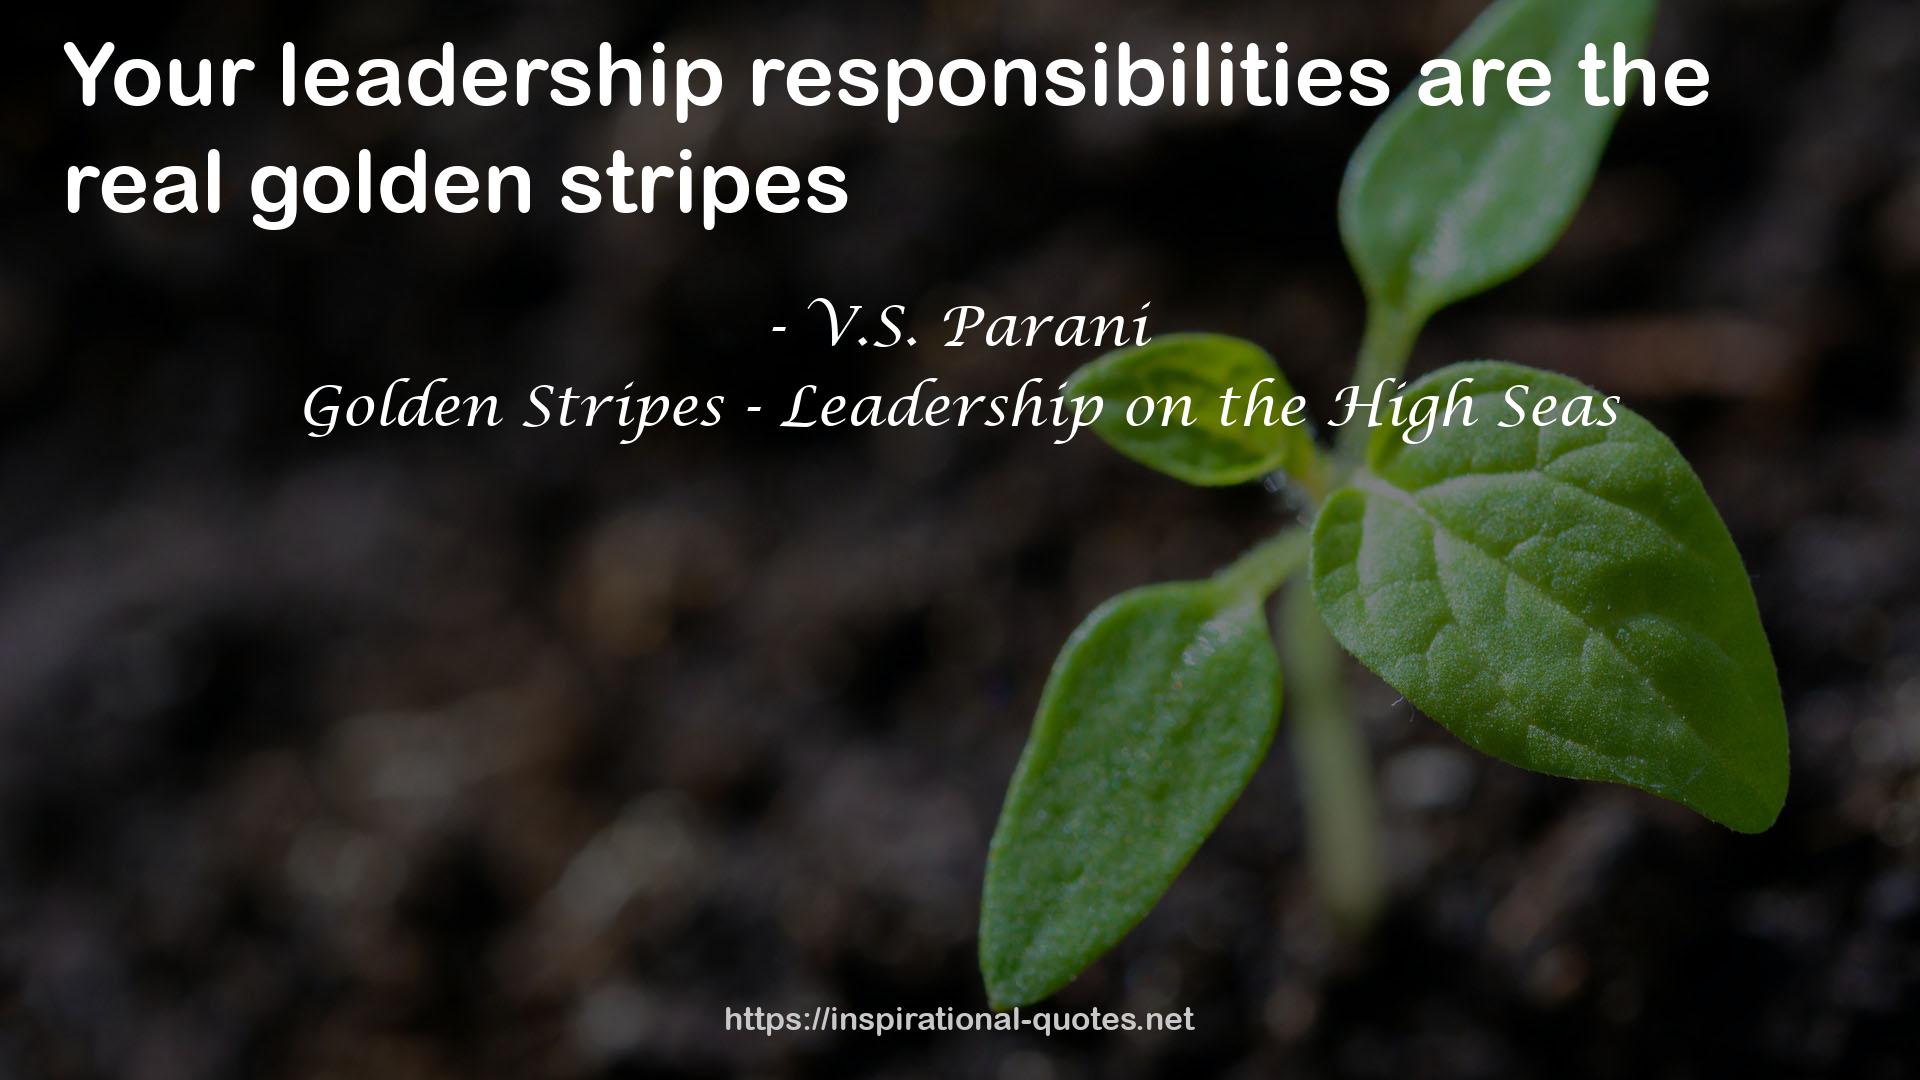 Golden Stripes - Leadership on the High Seas QUOTES